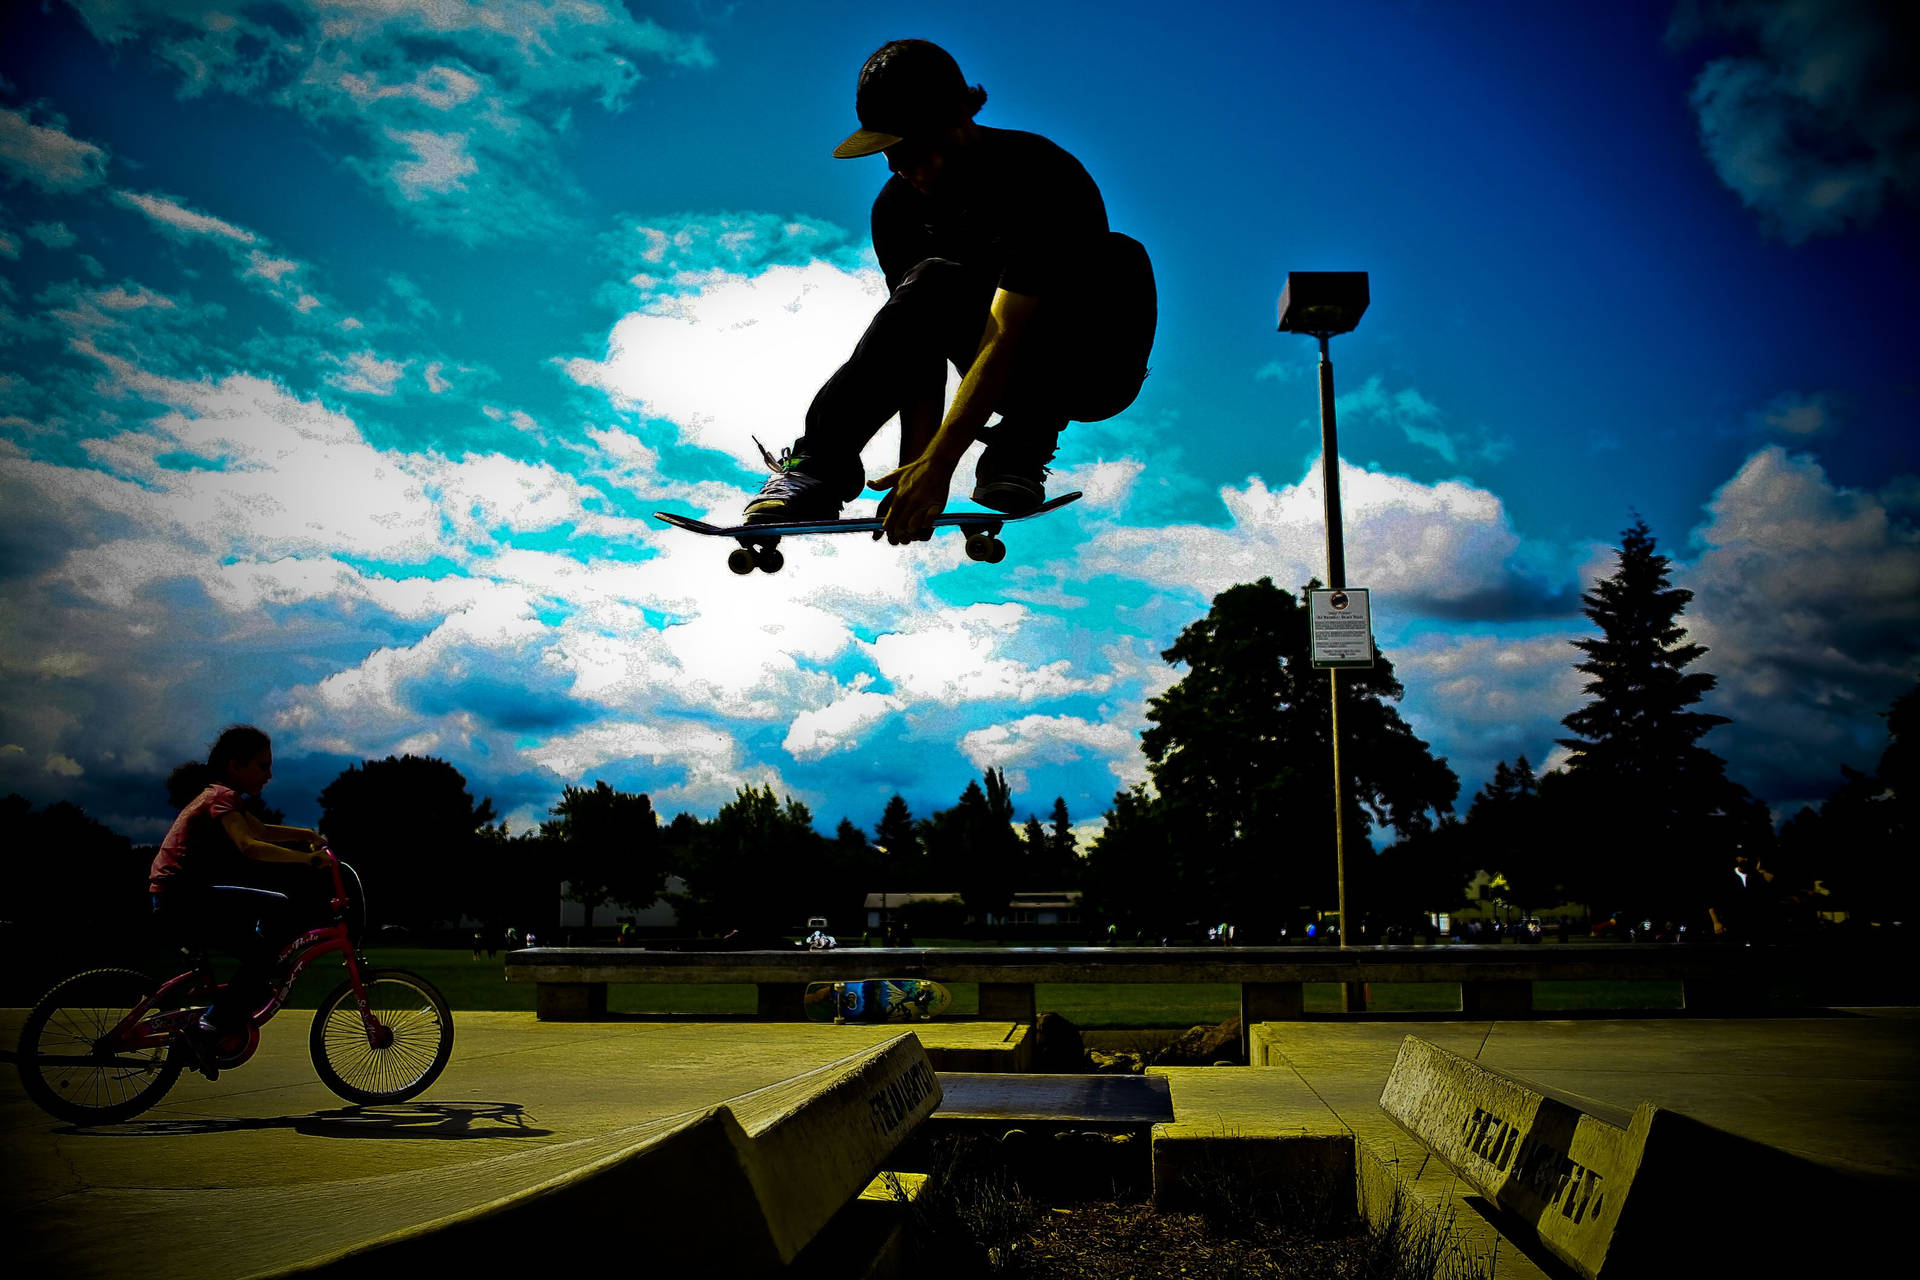 Skateboard Silhouette Performance Photography Background